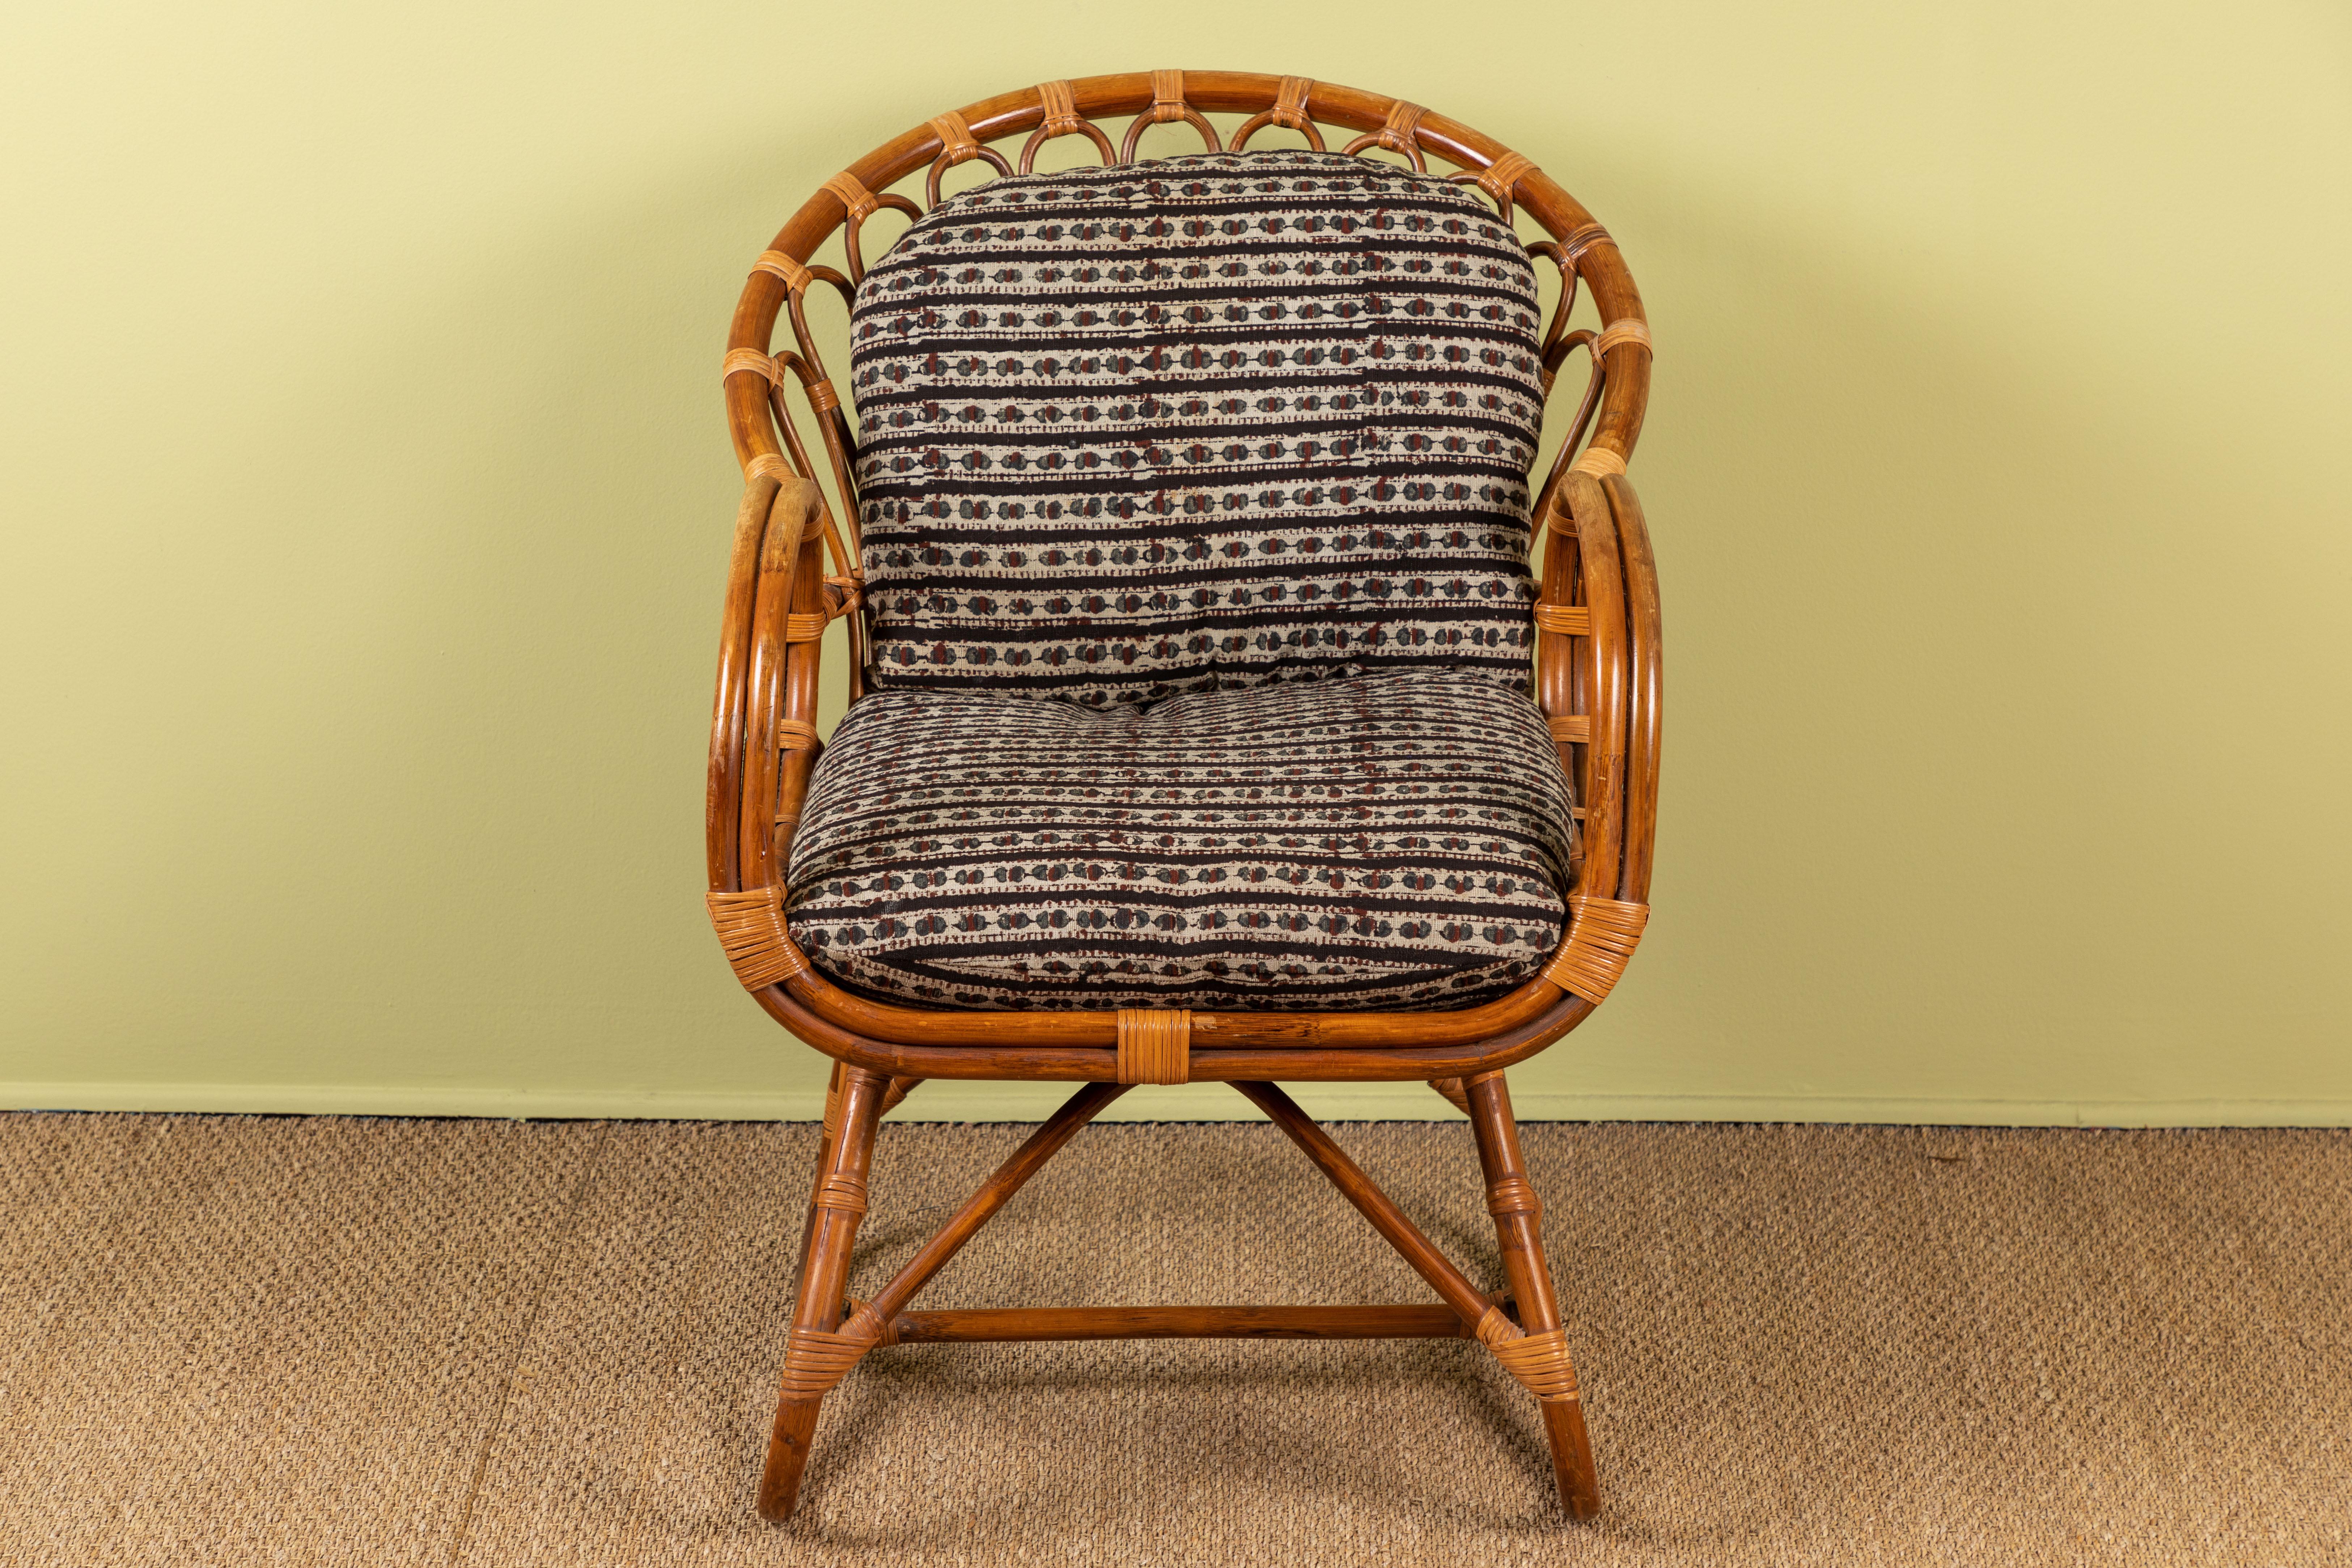 Vintage Albini chair with cushions upholstered in antique Indian block print textile.